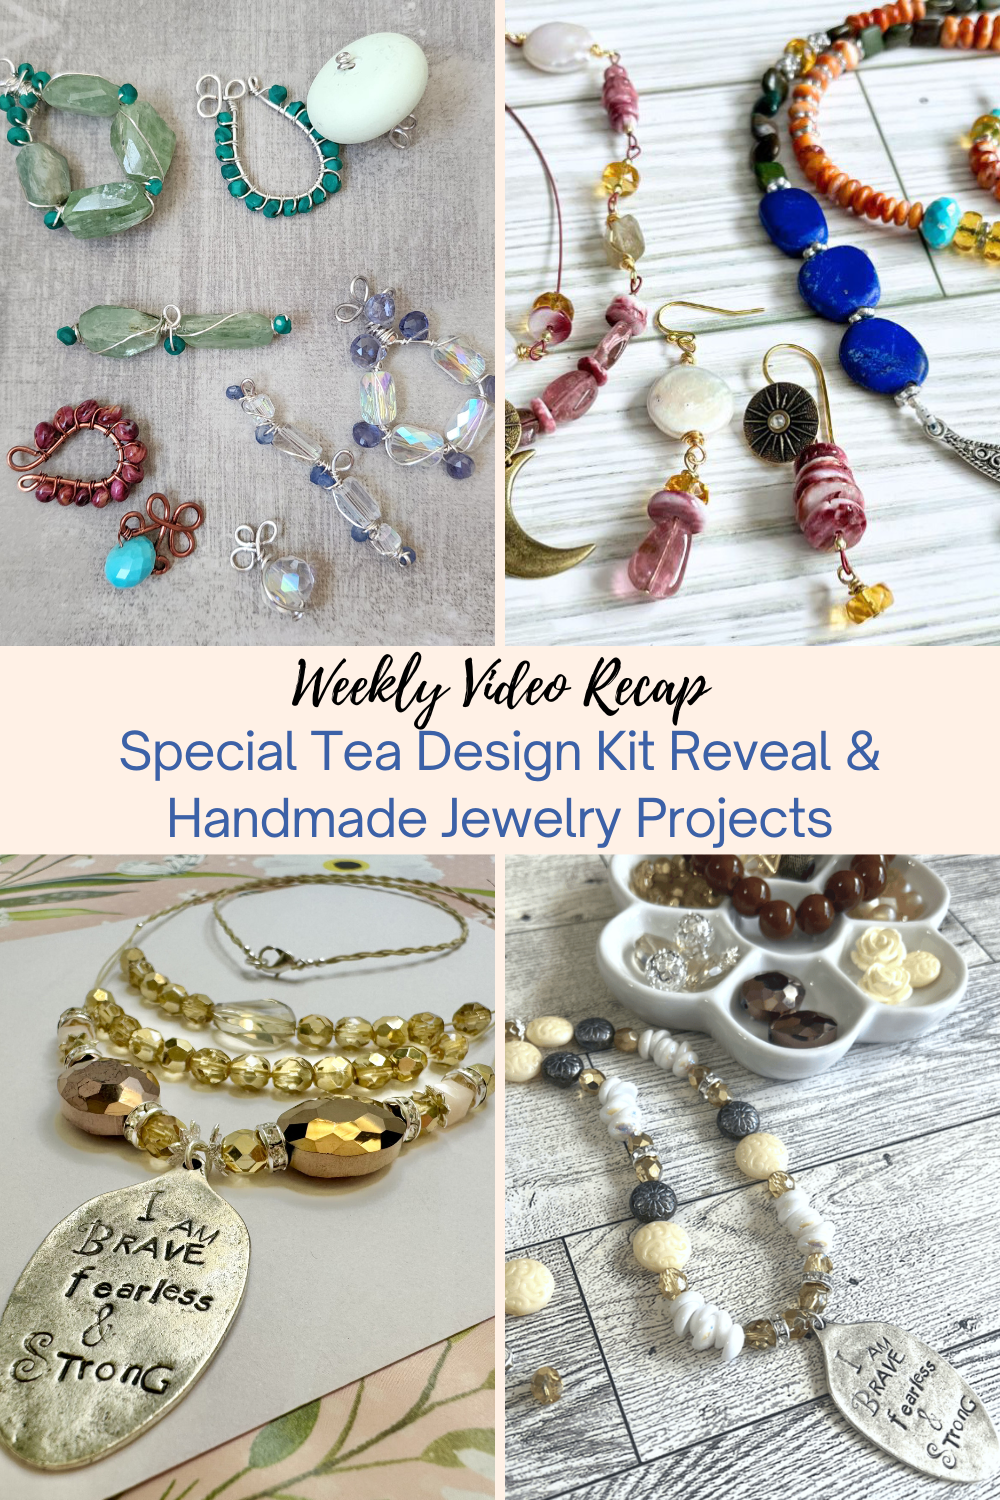 Special Tea Design Kit Reveal & Handmade Jewelry Projects Collage